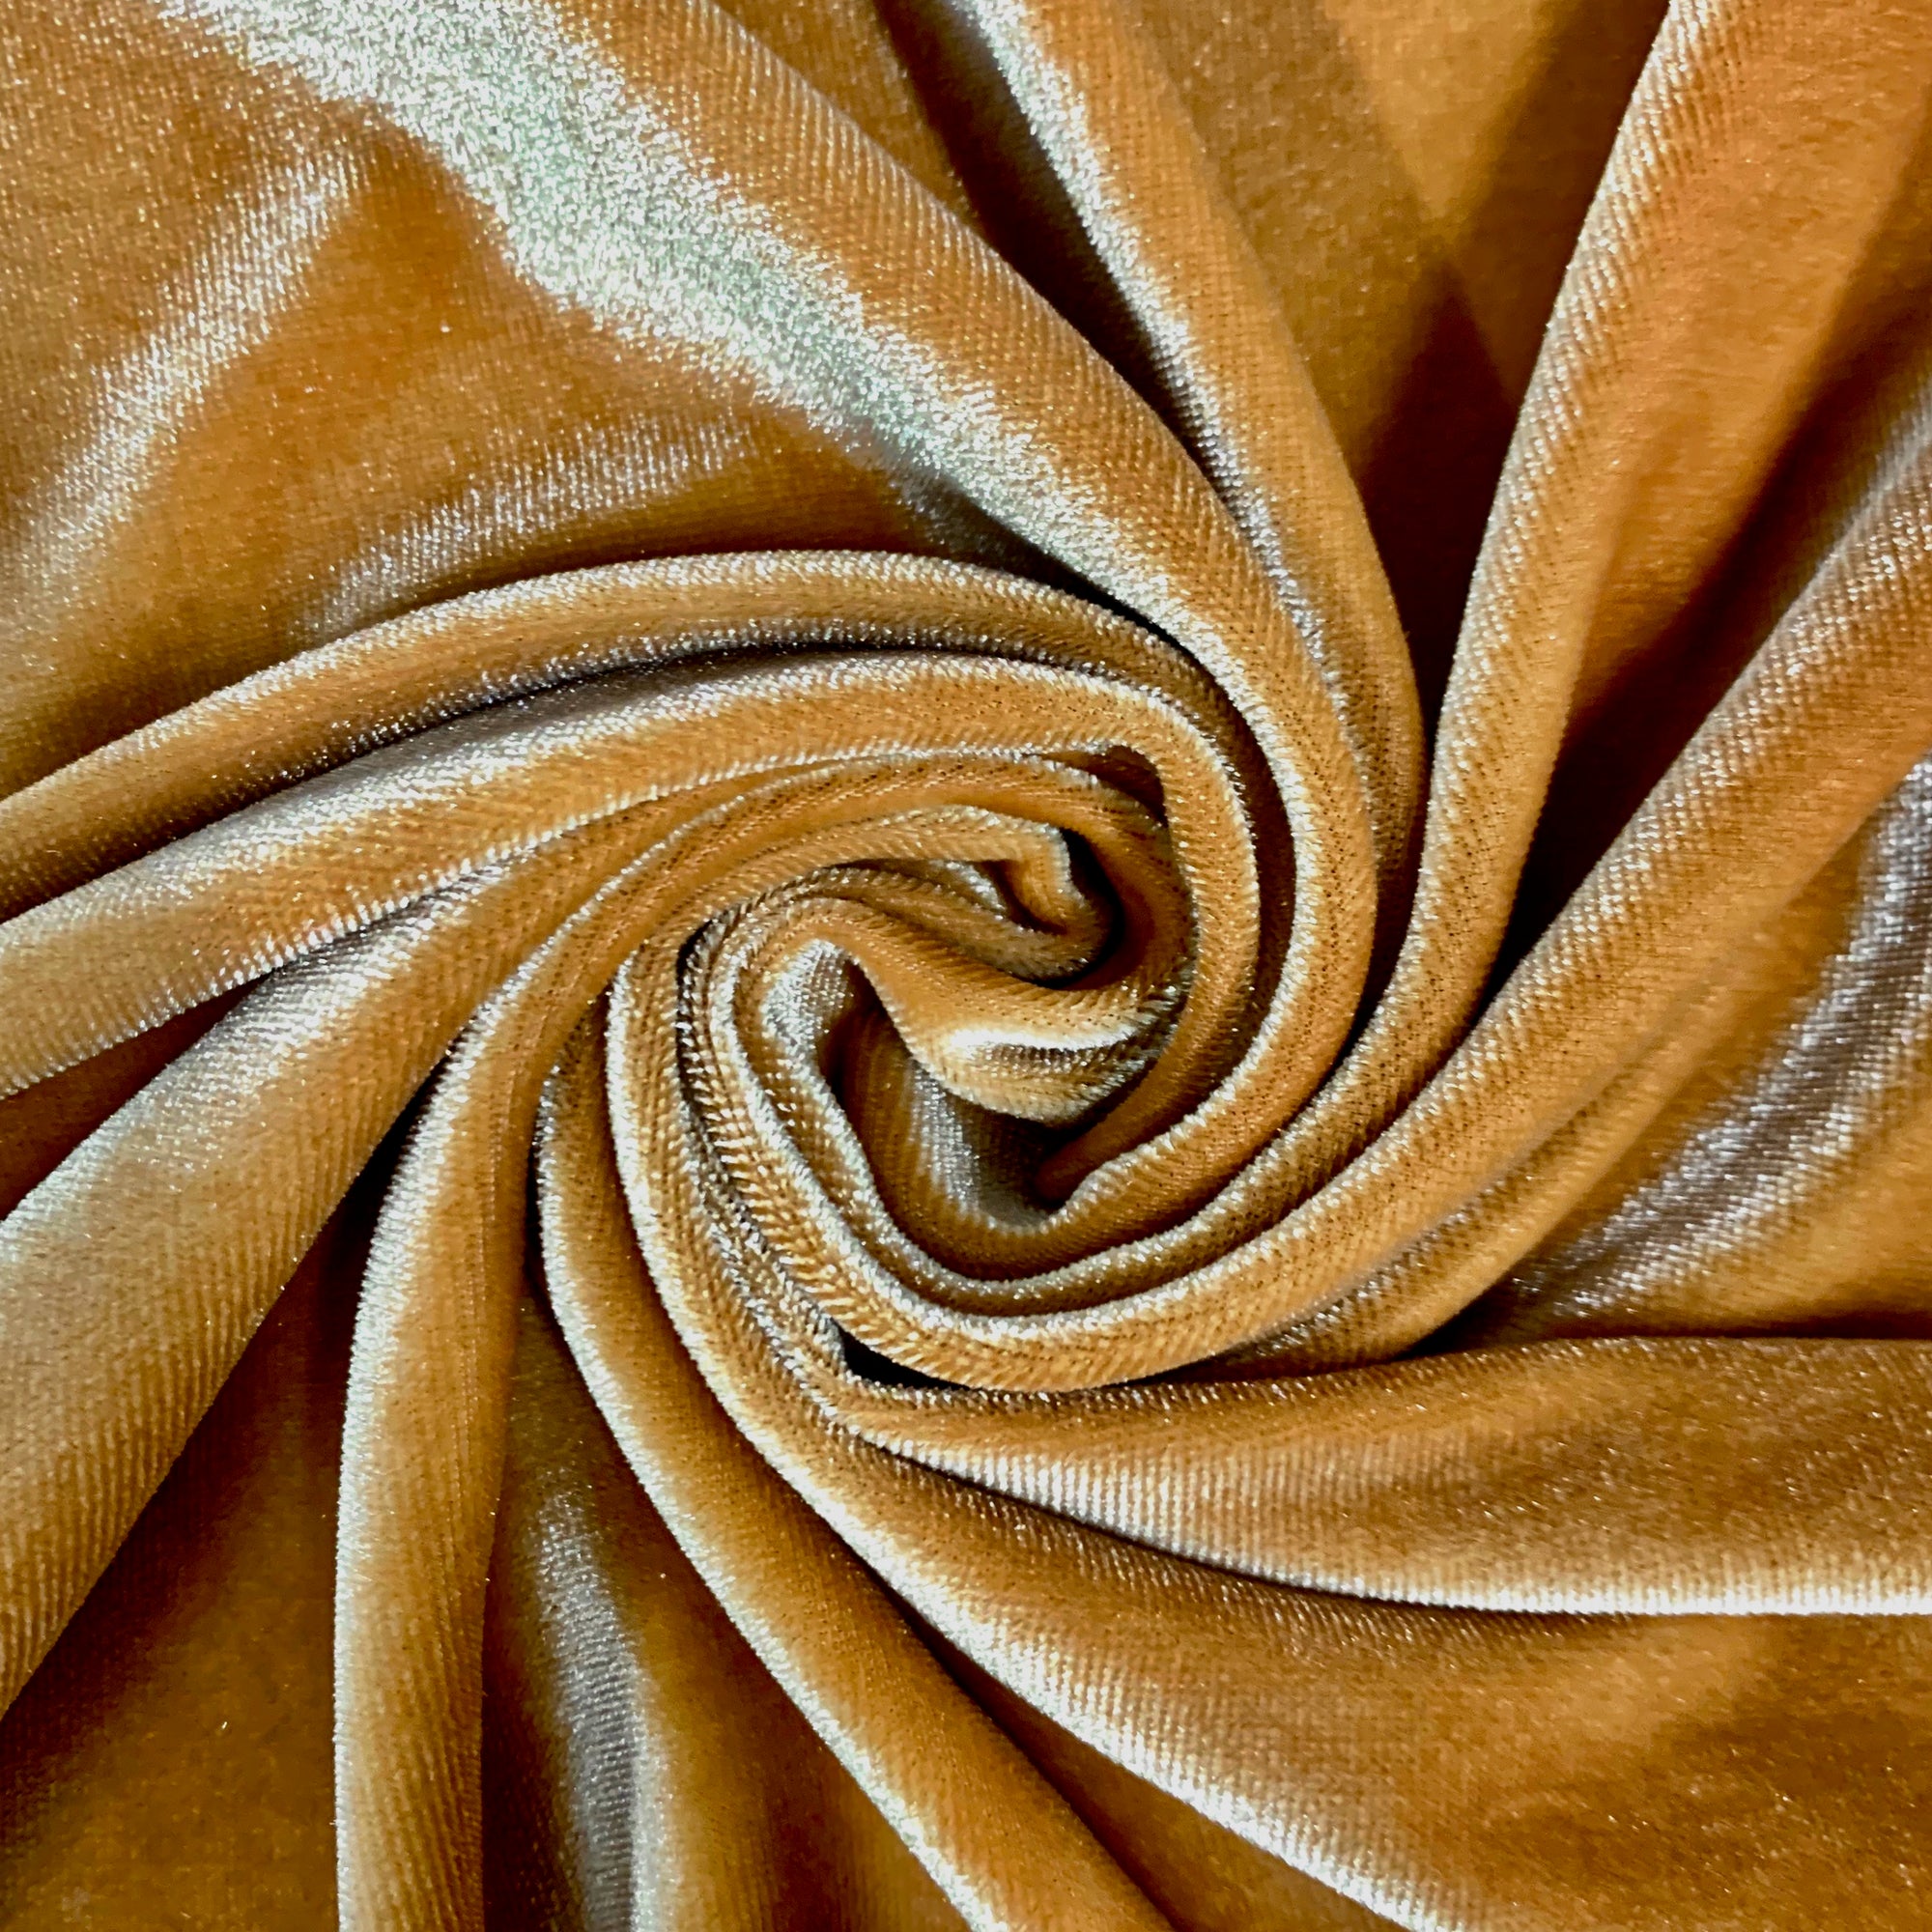 Princess BEIGE Polyester Stretch Velvet Fabric for Bows, Top Knots, Head Wraps, Scrunchies, Clothes, Costumes, Crafts